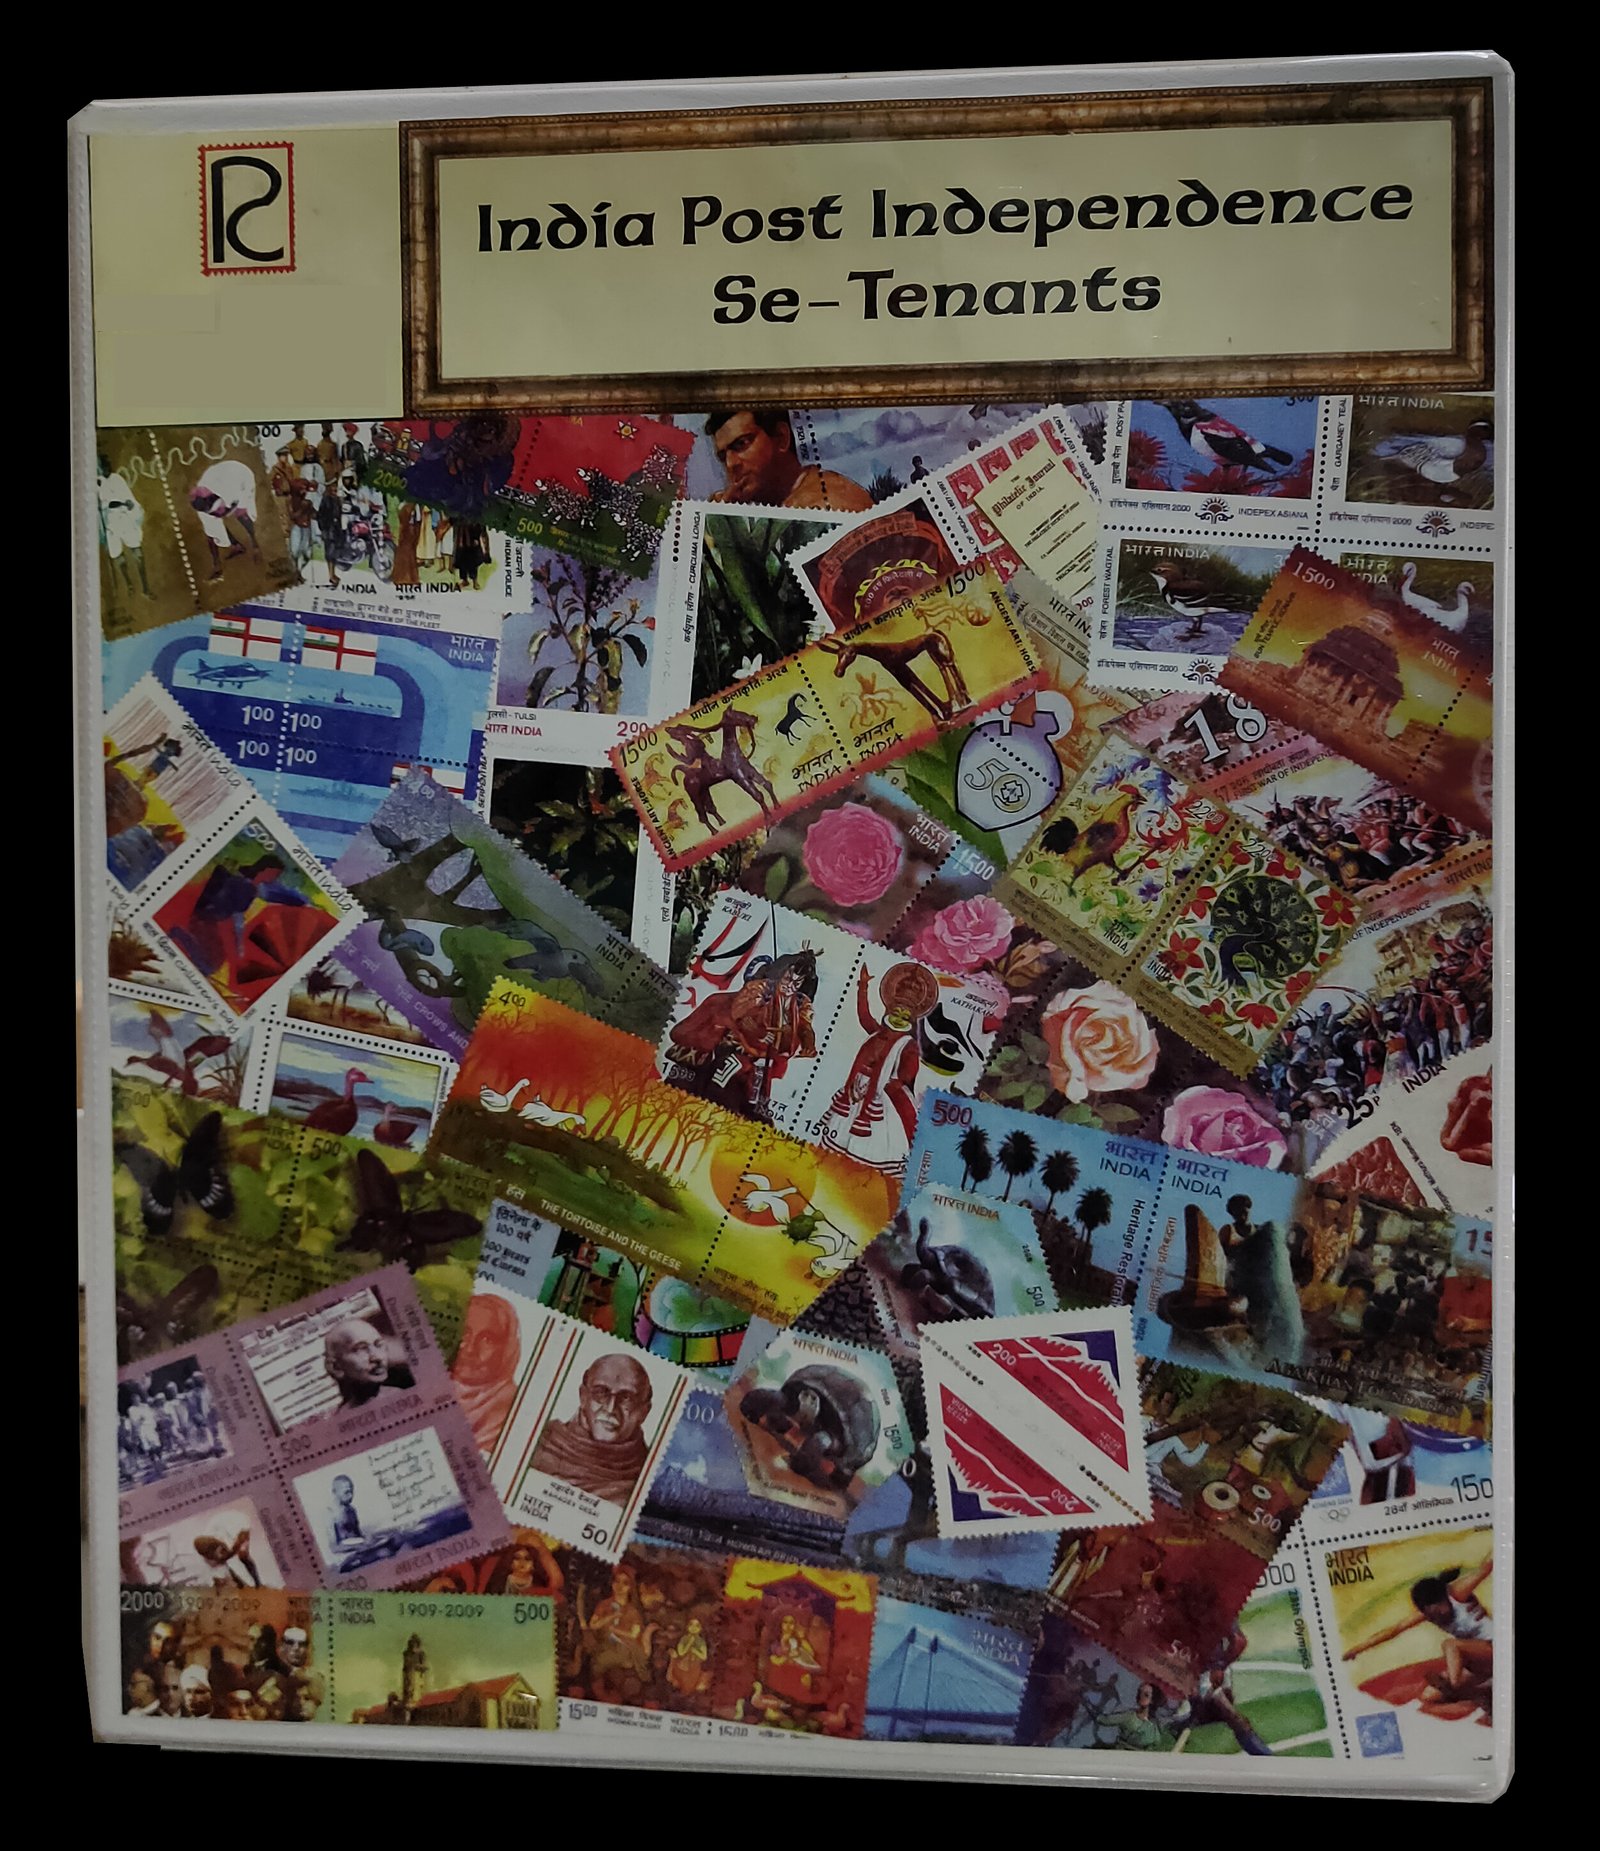 INDIA POST INDEPENDENCE, Se-Tenant 1974-2019, 36 Pages, 'A' Series�(ALBUM WITH ONLY ILLUSTRATIONS , STAMPS NOT INCLUDED WITH ALBUM)